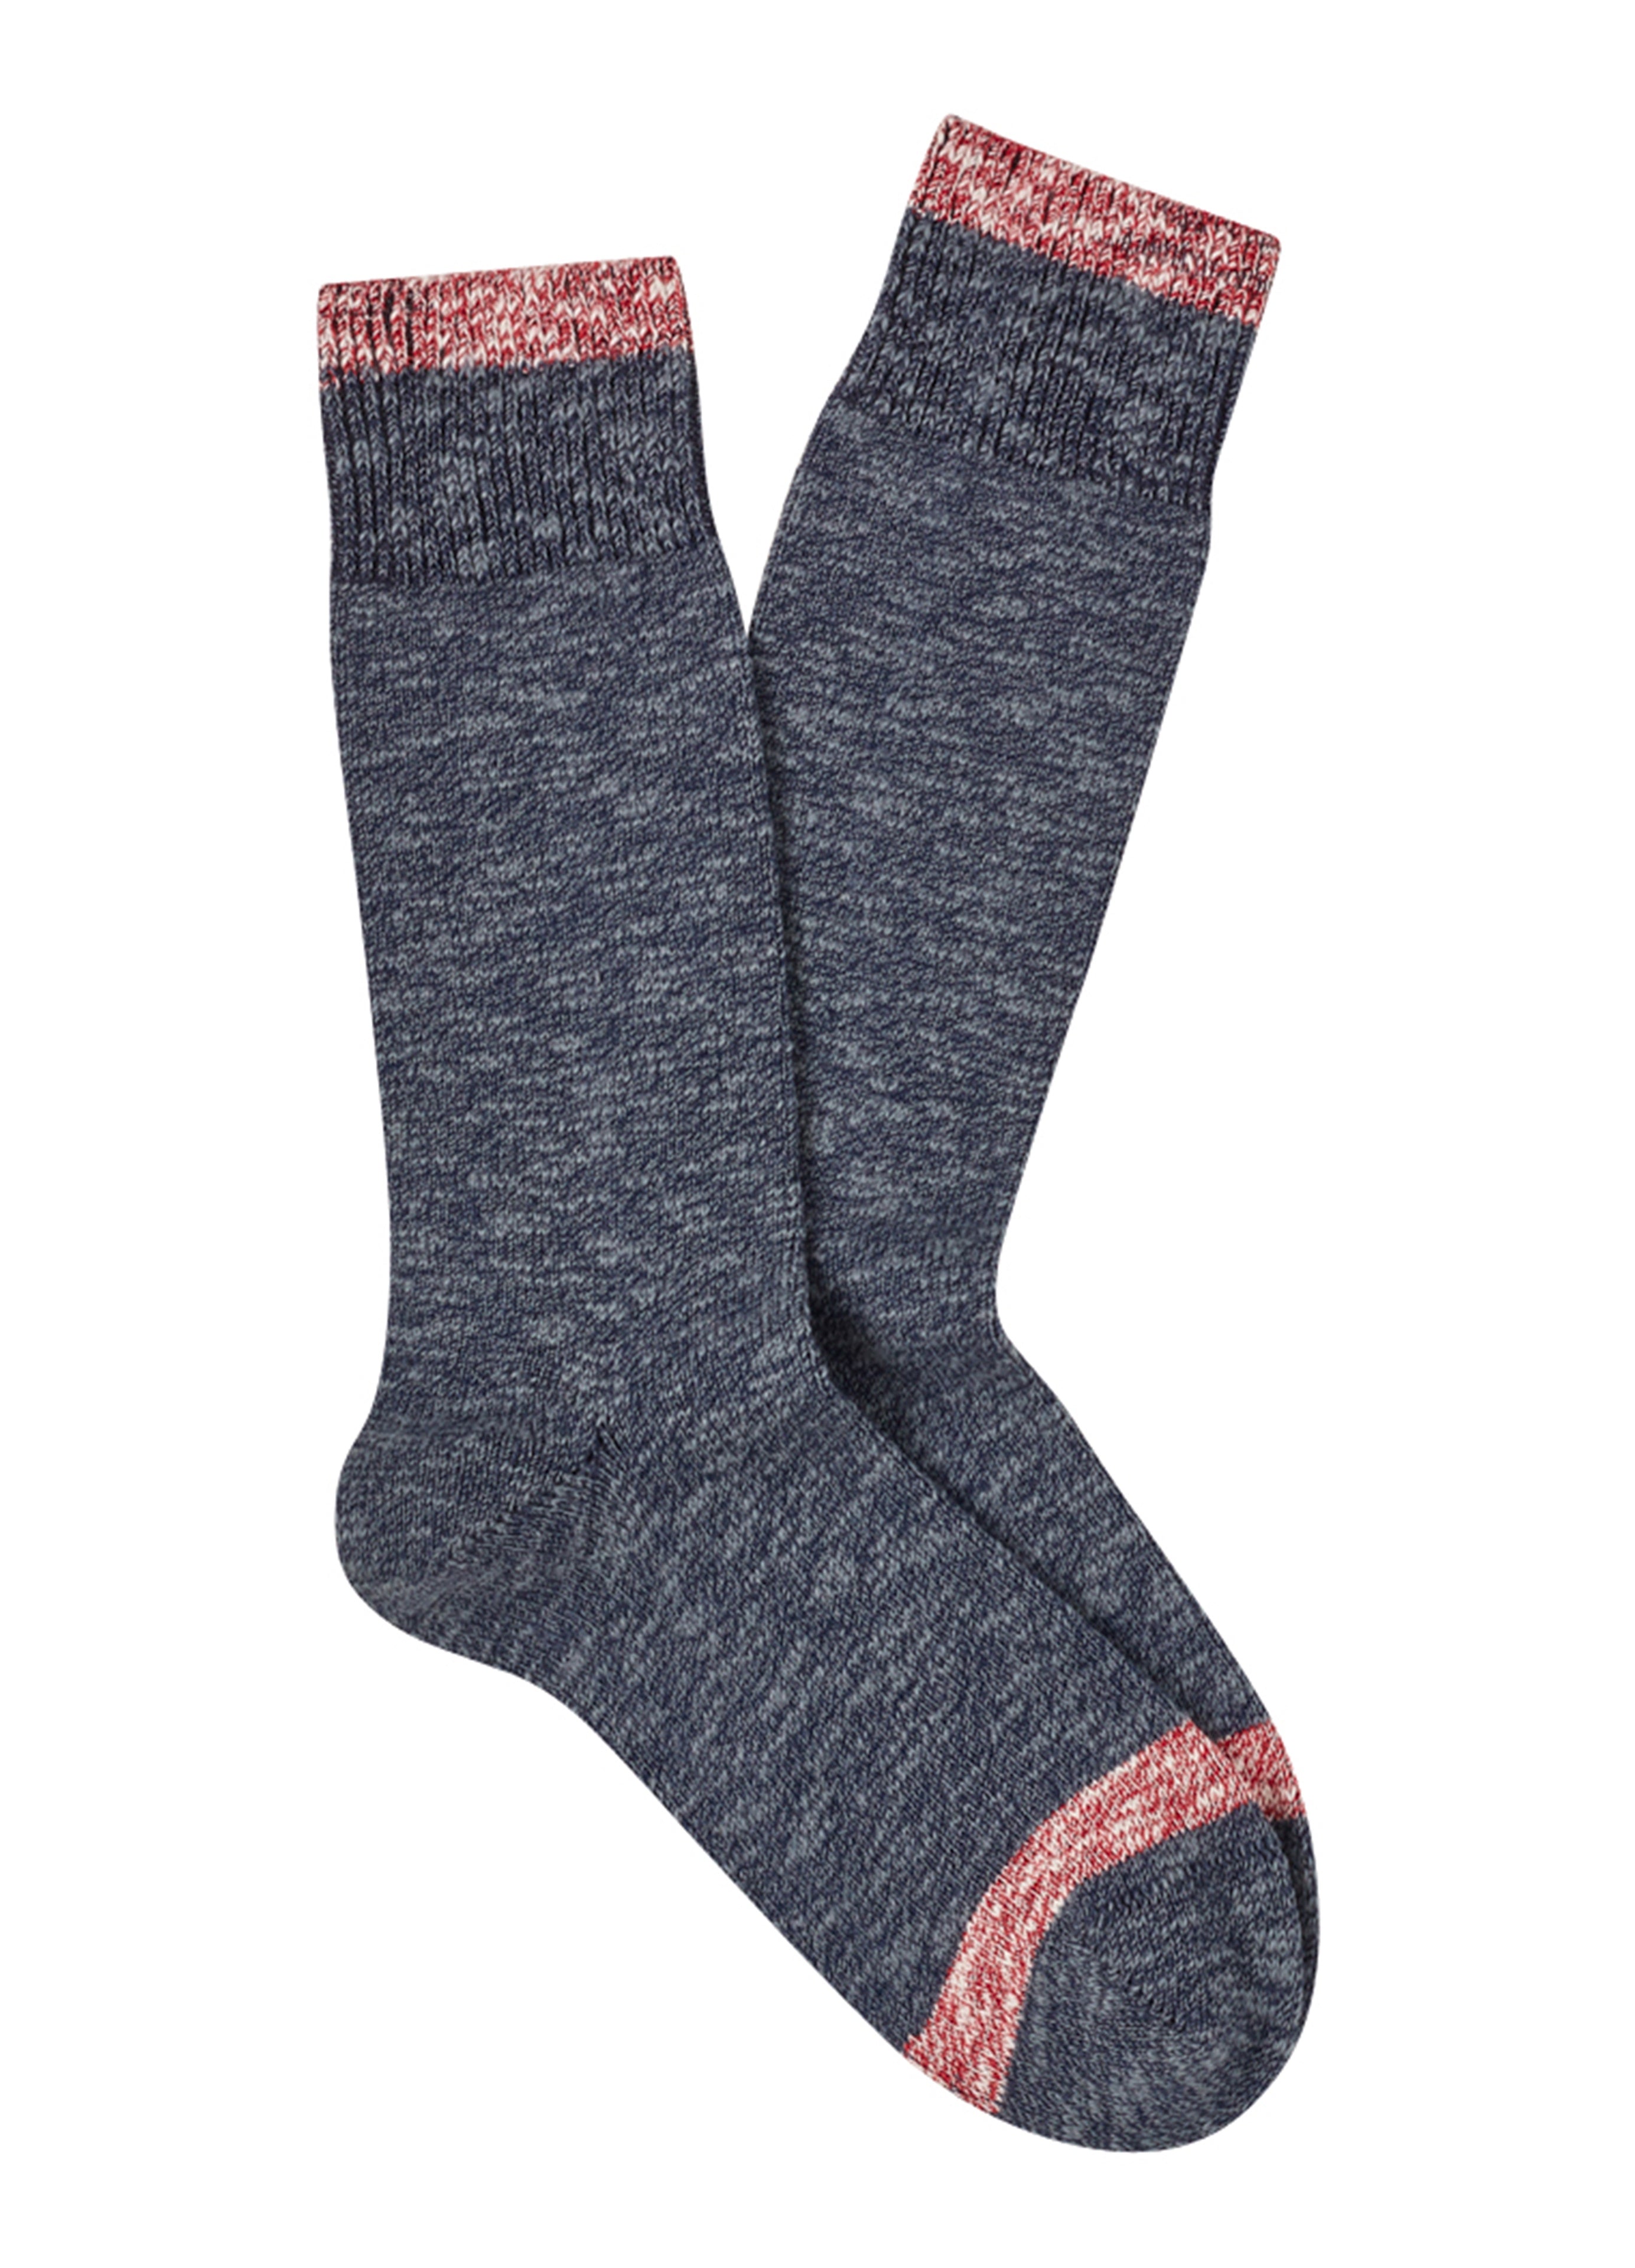 Marcoliani Grey & Red Marbled Contrast Tip Socks